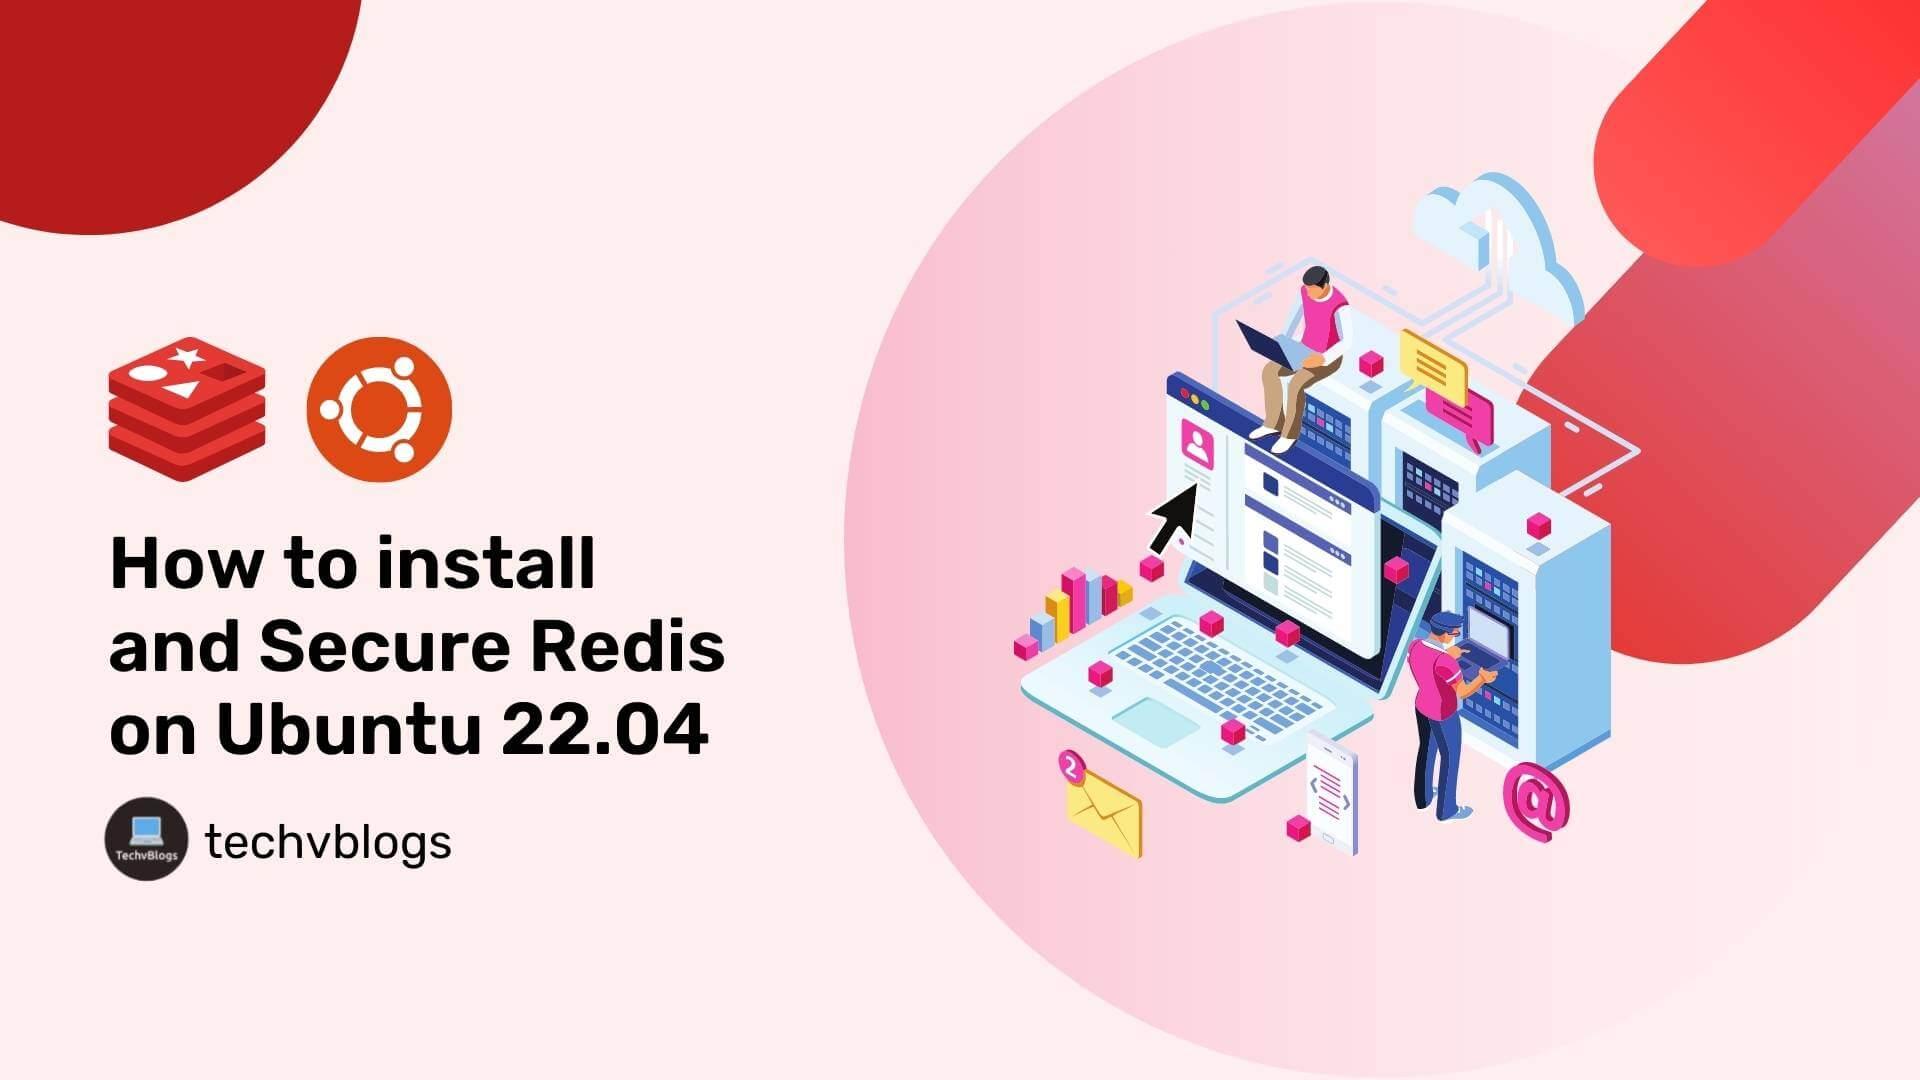 How to install and Secure Redis on Ubuntu 22.04